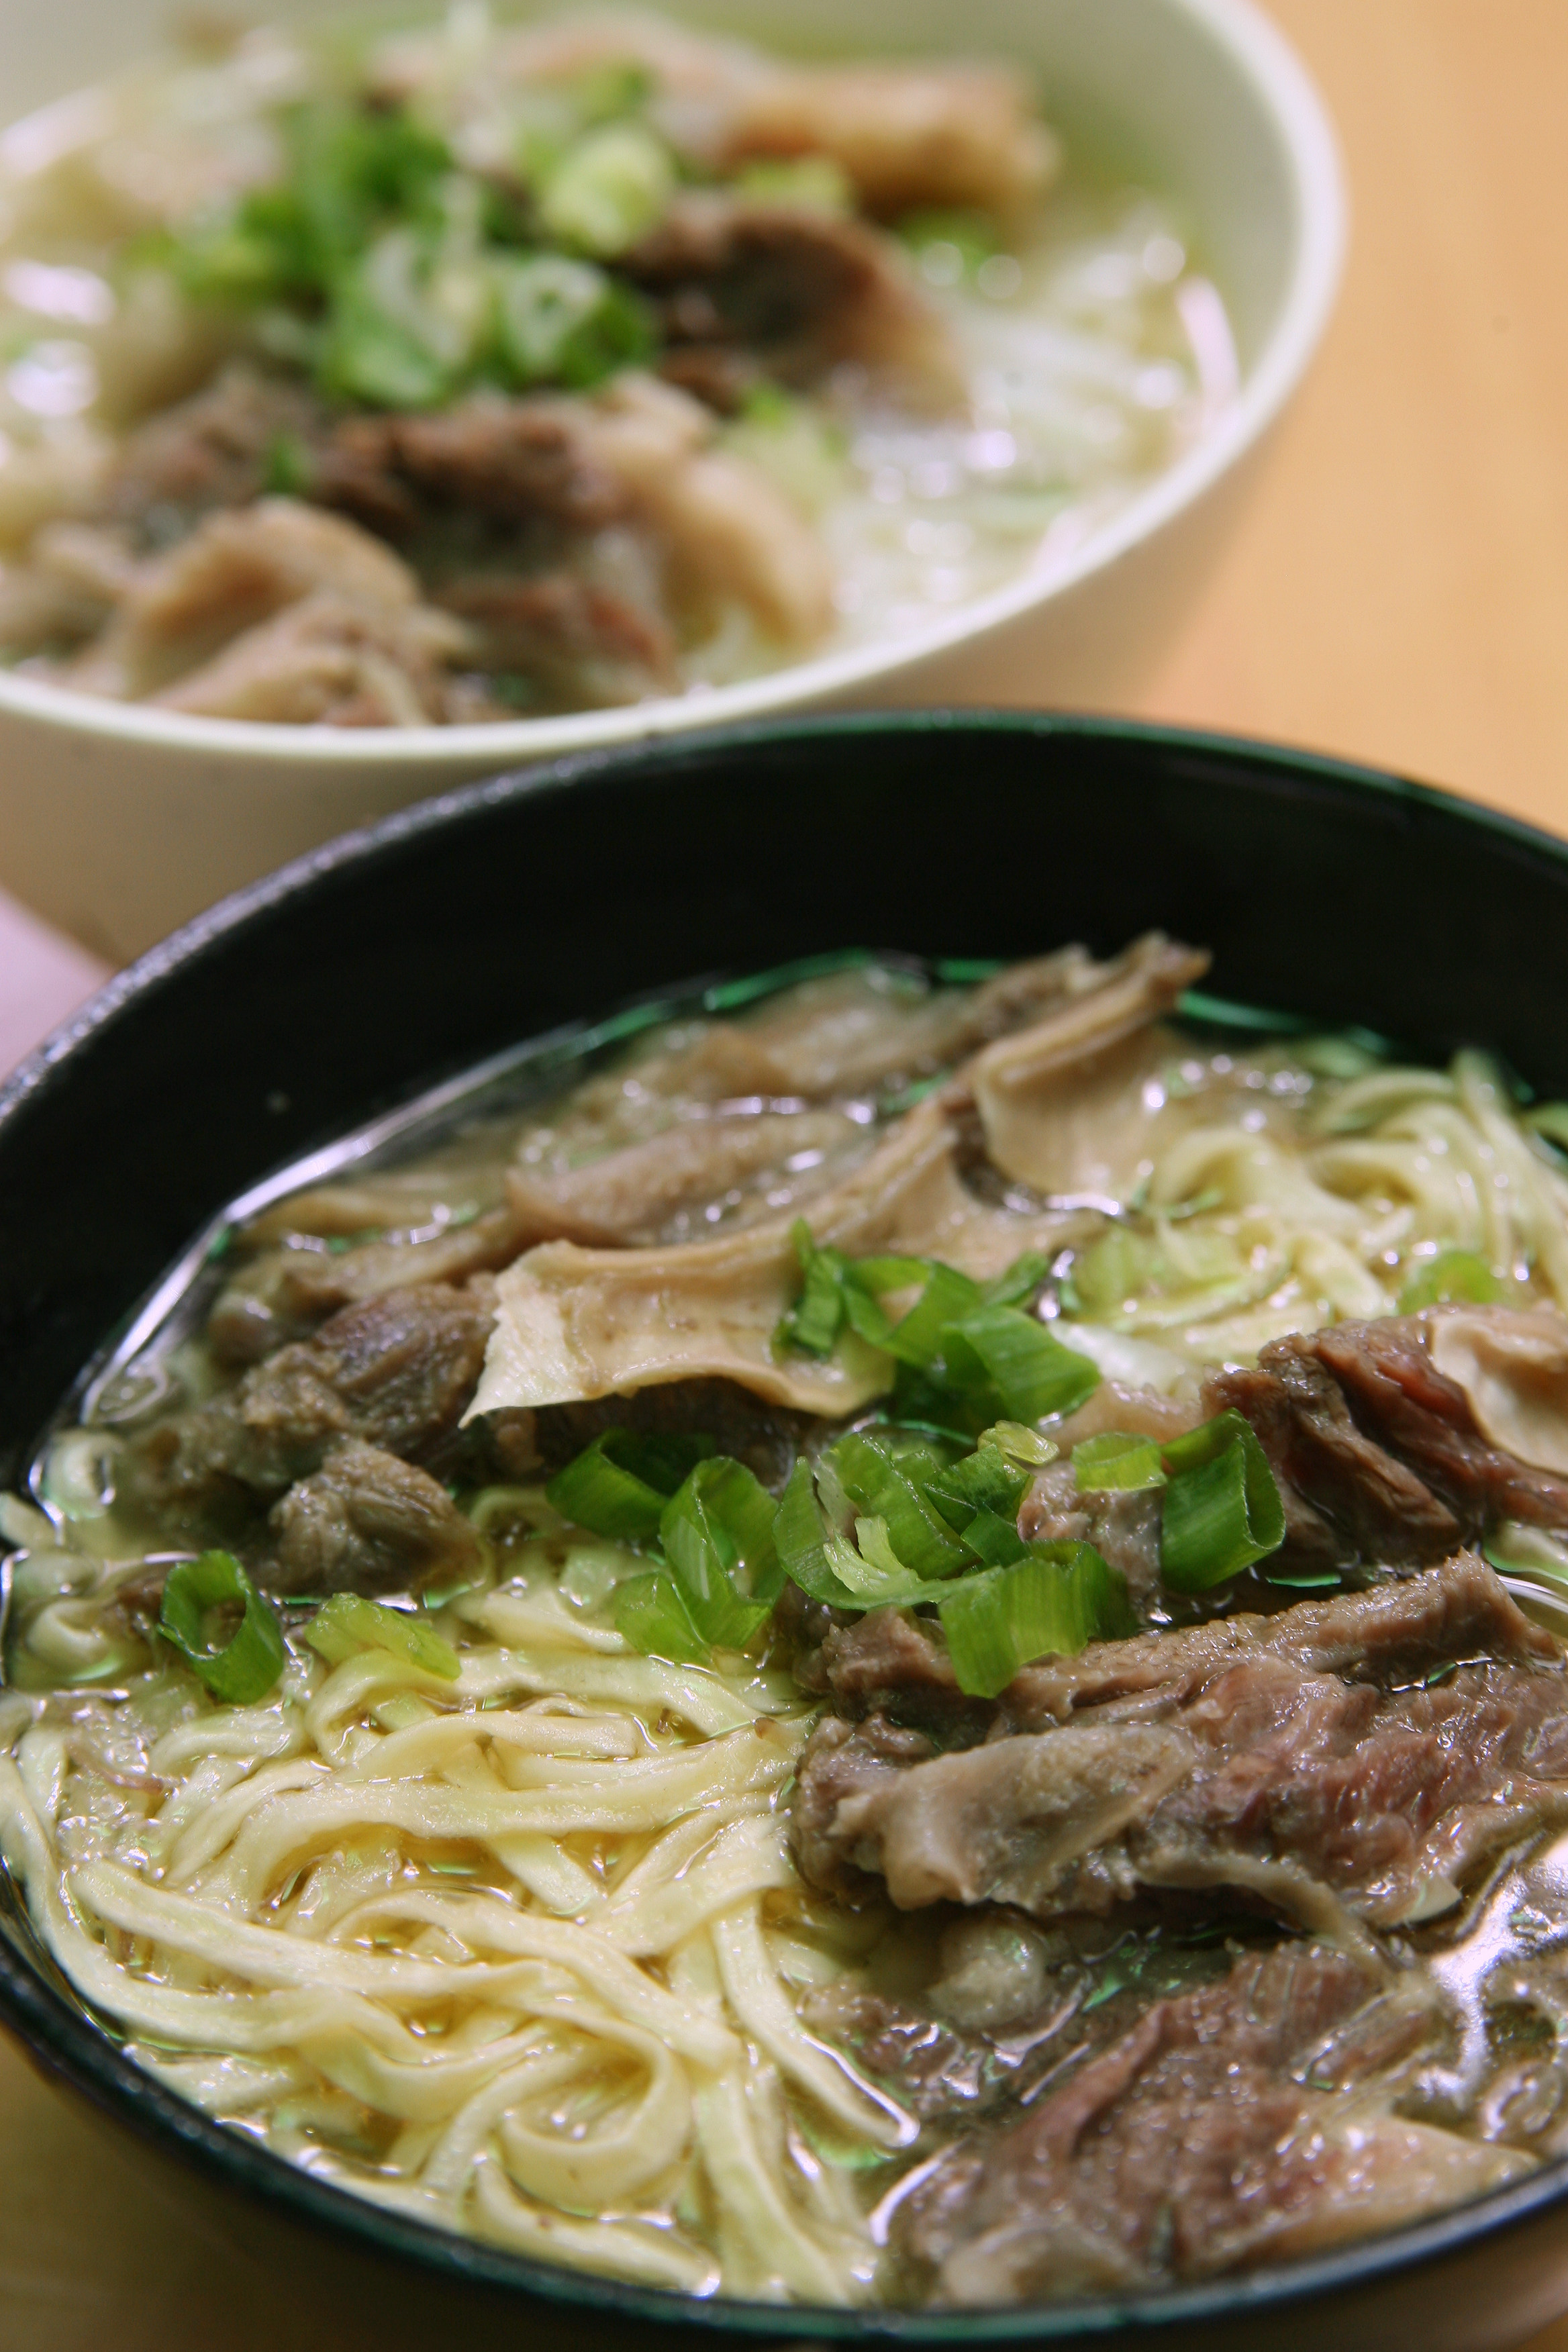 Beef brisket with rice noodles (top) and beef brisket with e-fu noodles at Kau Kee. Photo: SCMP